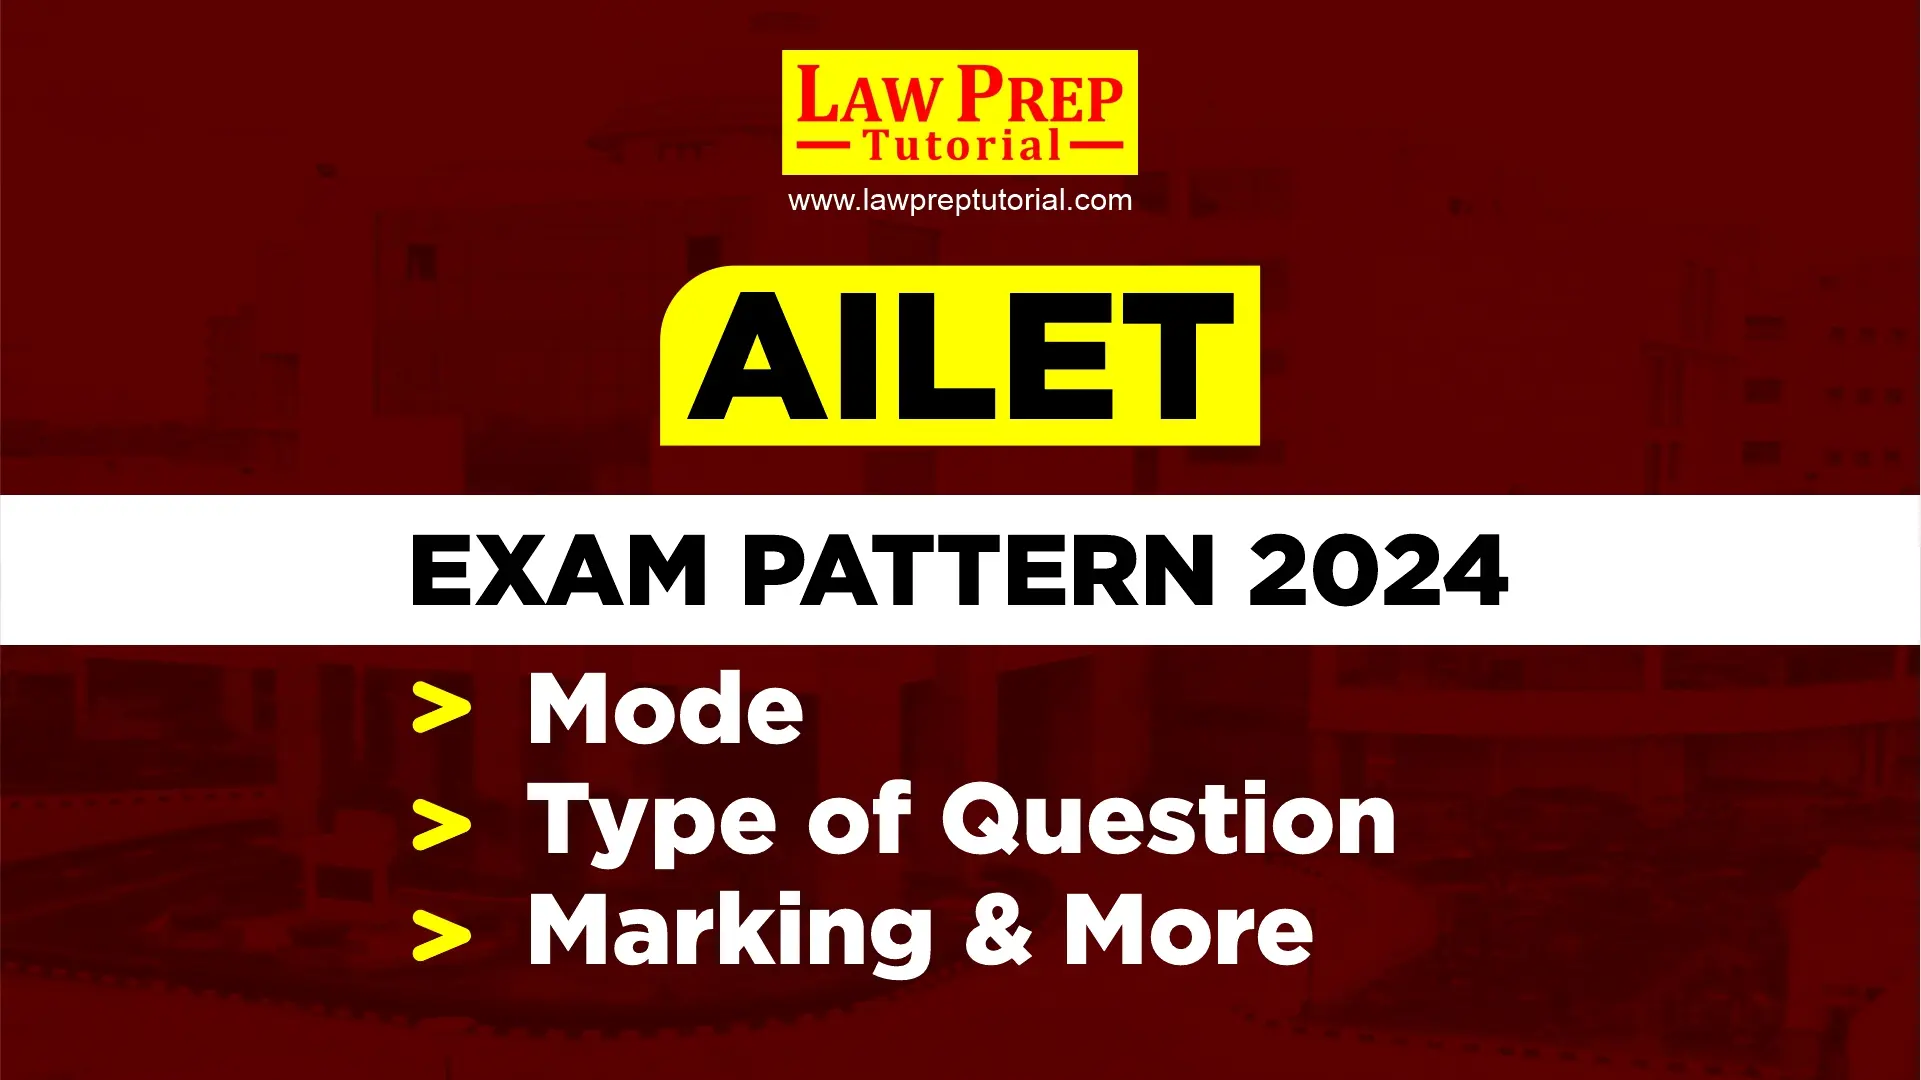 AILET Exam Pattern 2024, Mode, Type of Question, Marking & More